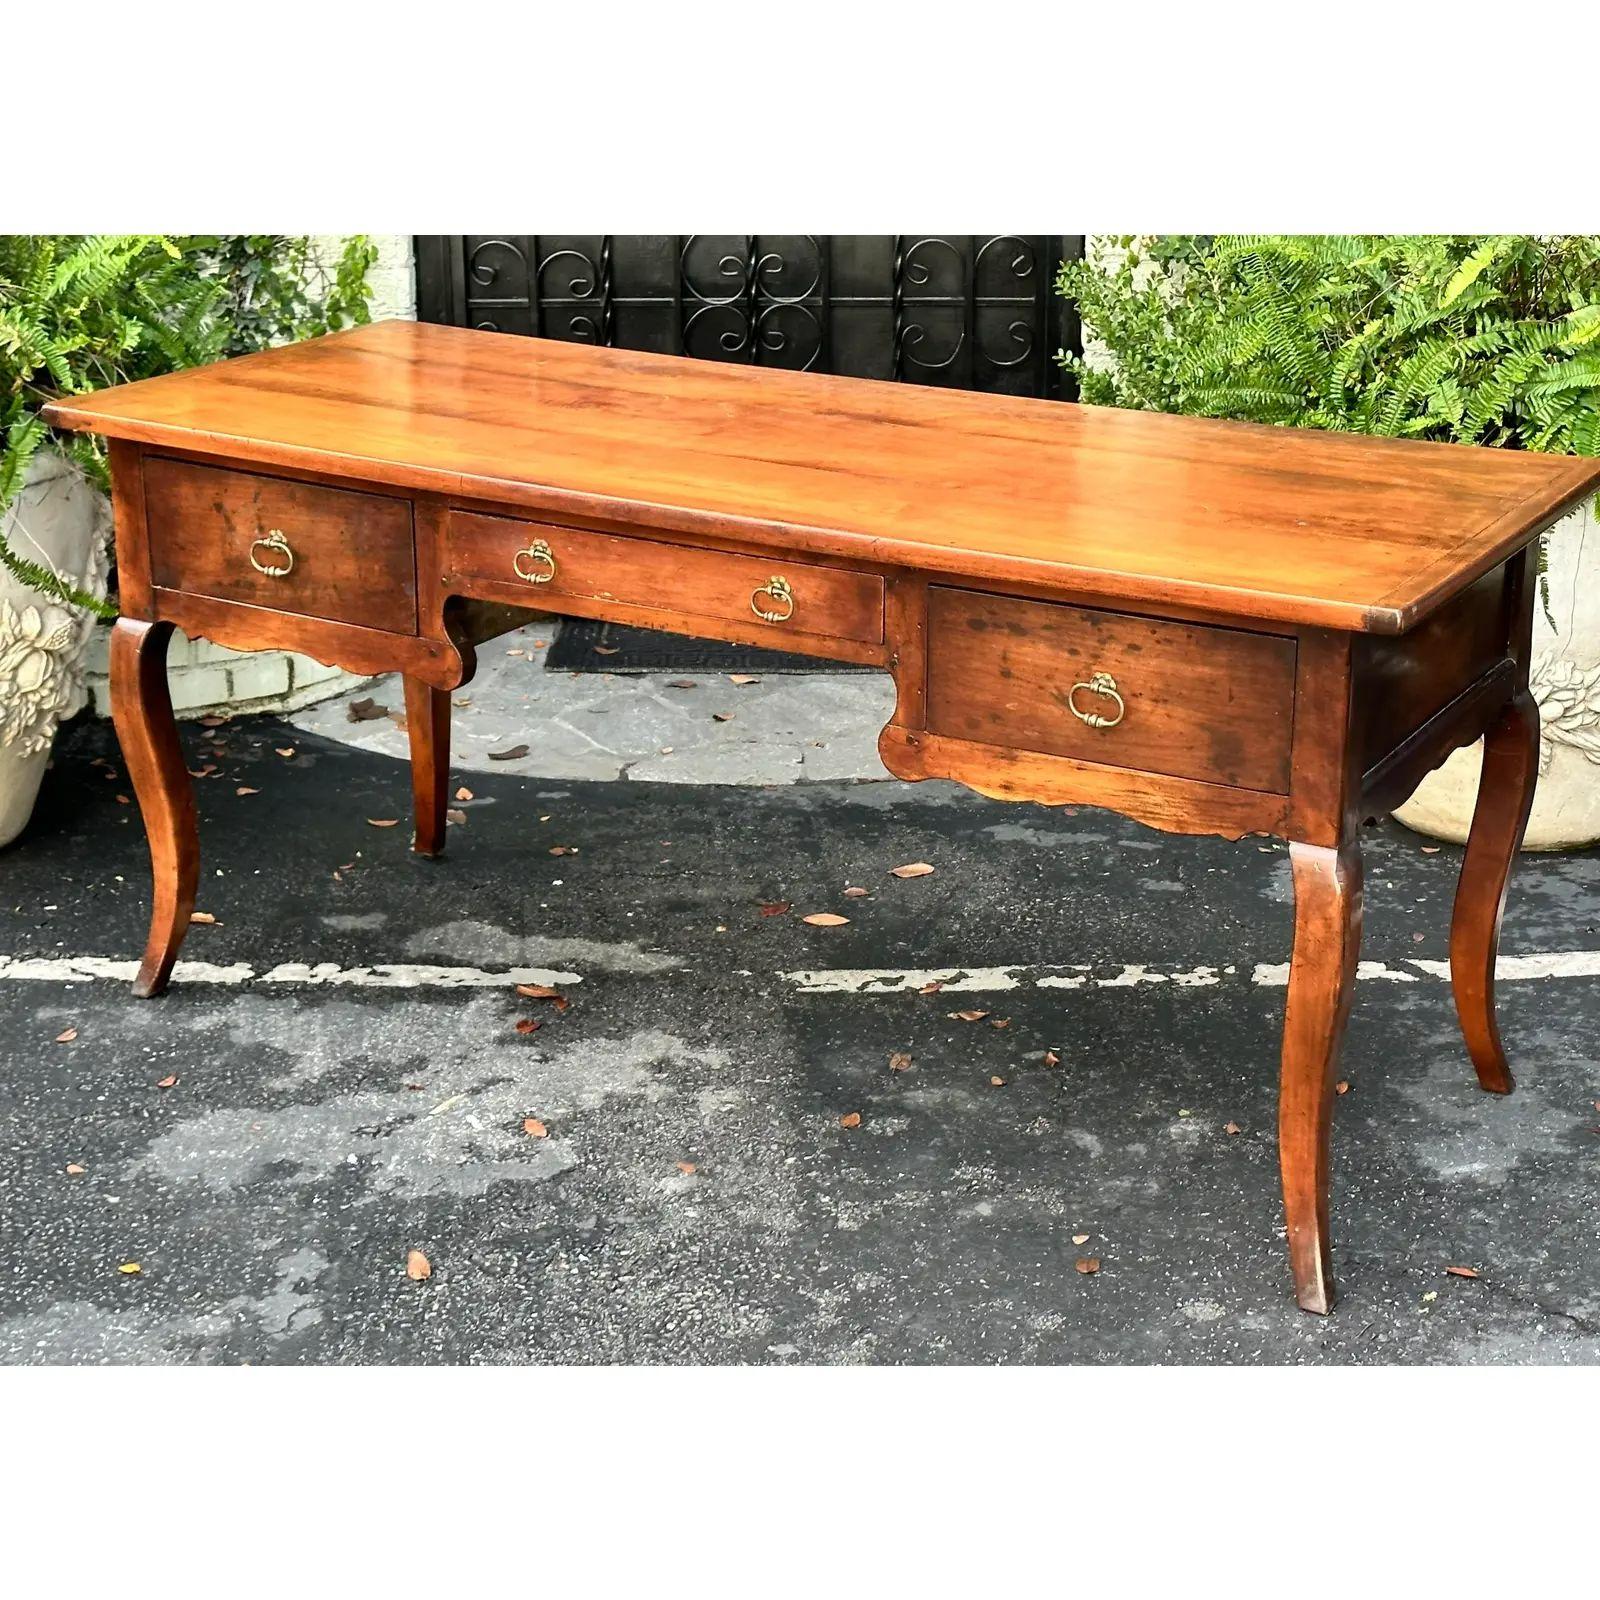 Antique French Country, Rustic European Writing Desk Table, Early 19th Century 2